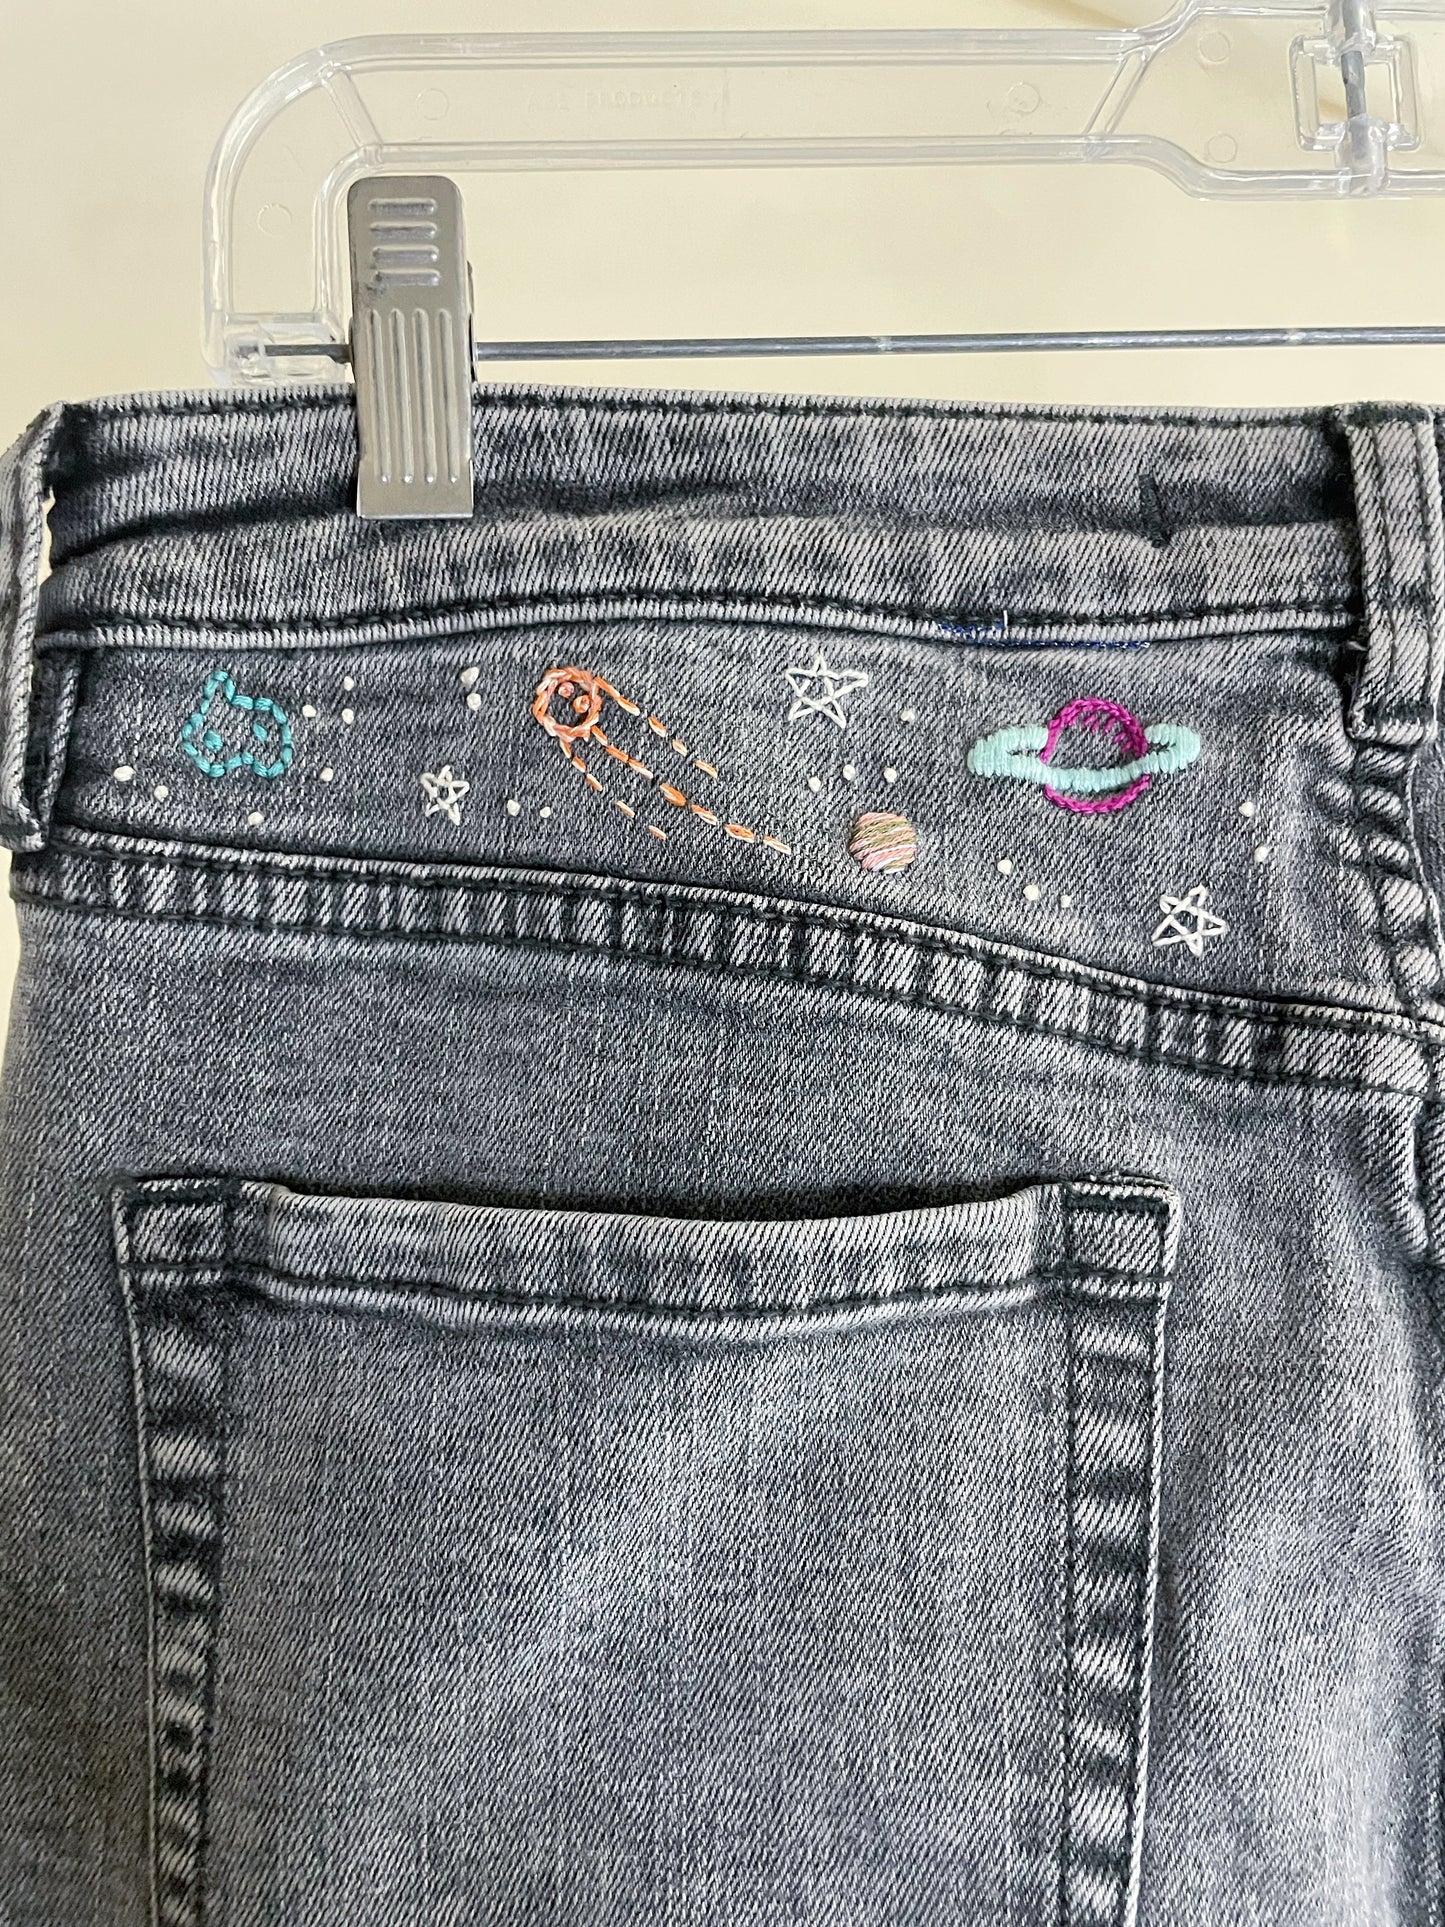 30 Waist Free People Cosmically Embroidered Jeans- M/Lg